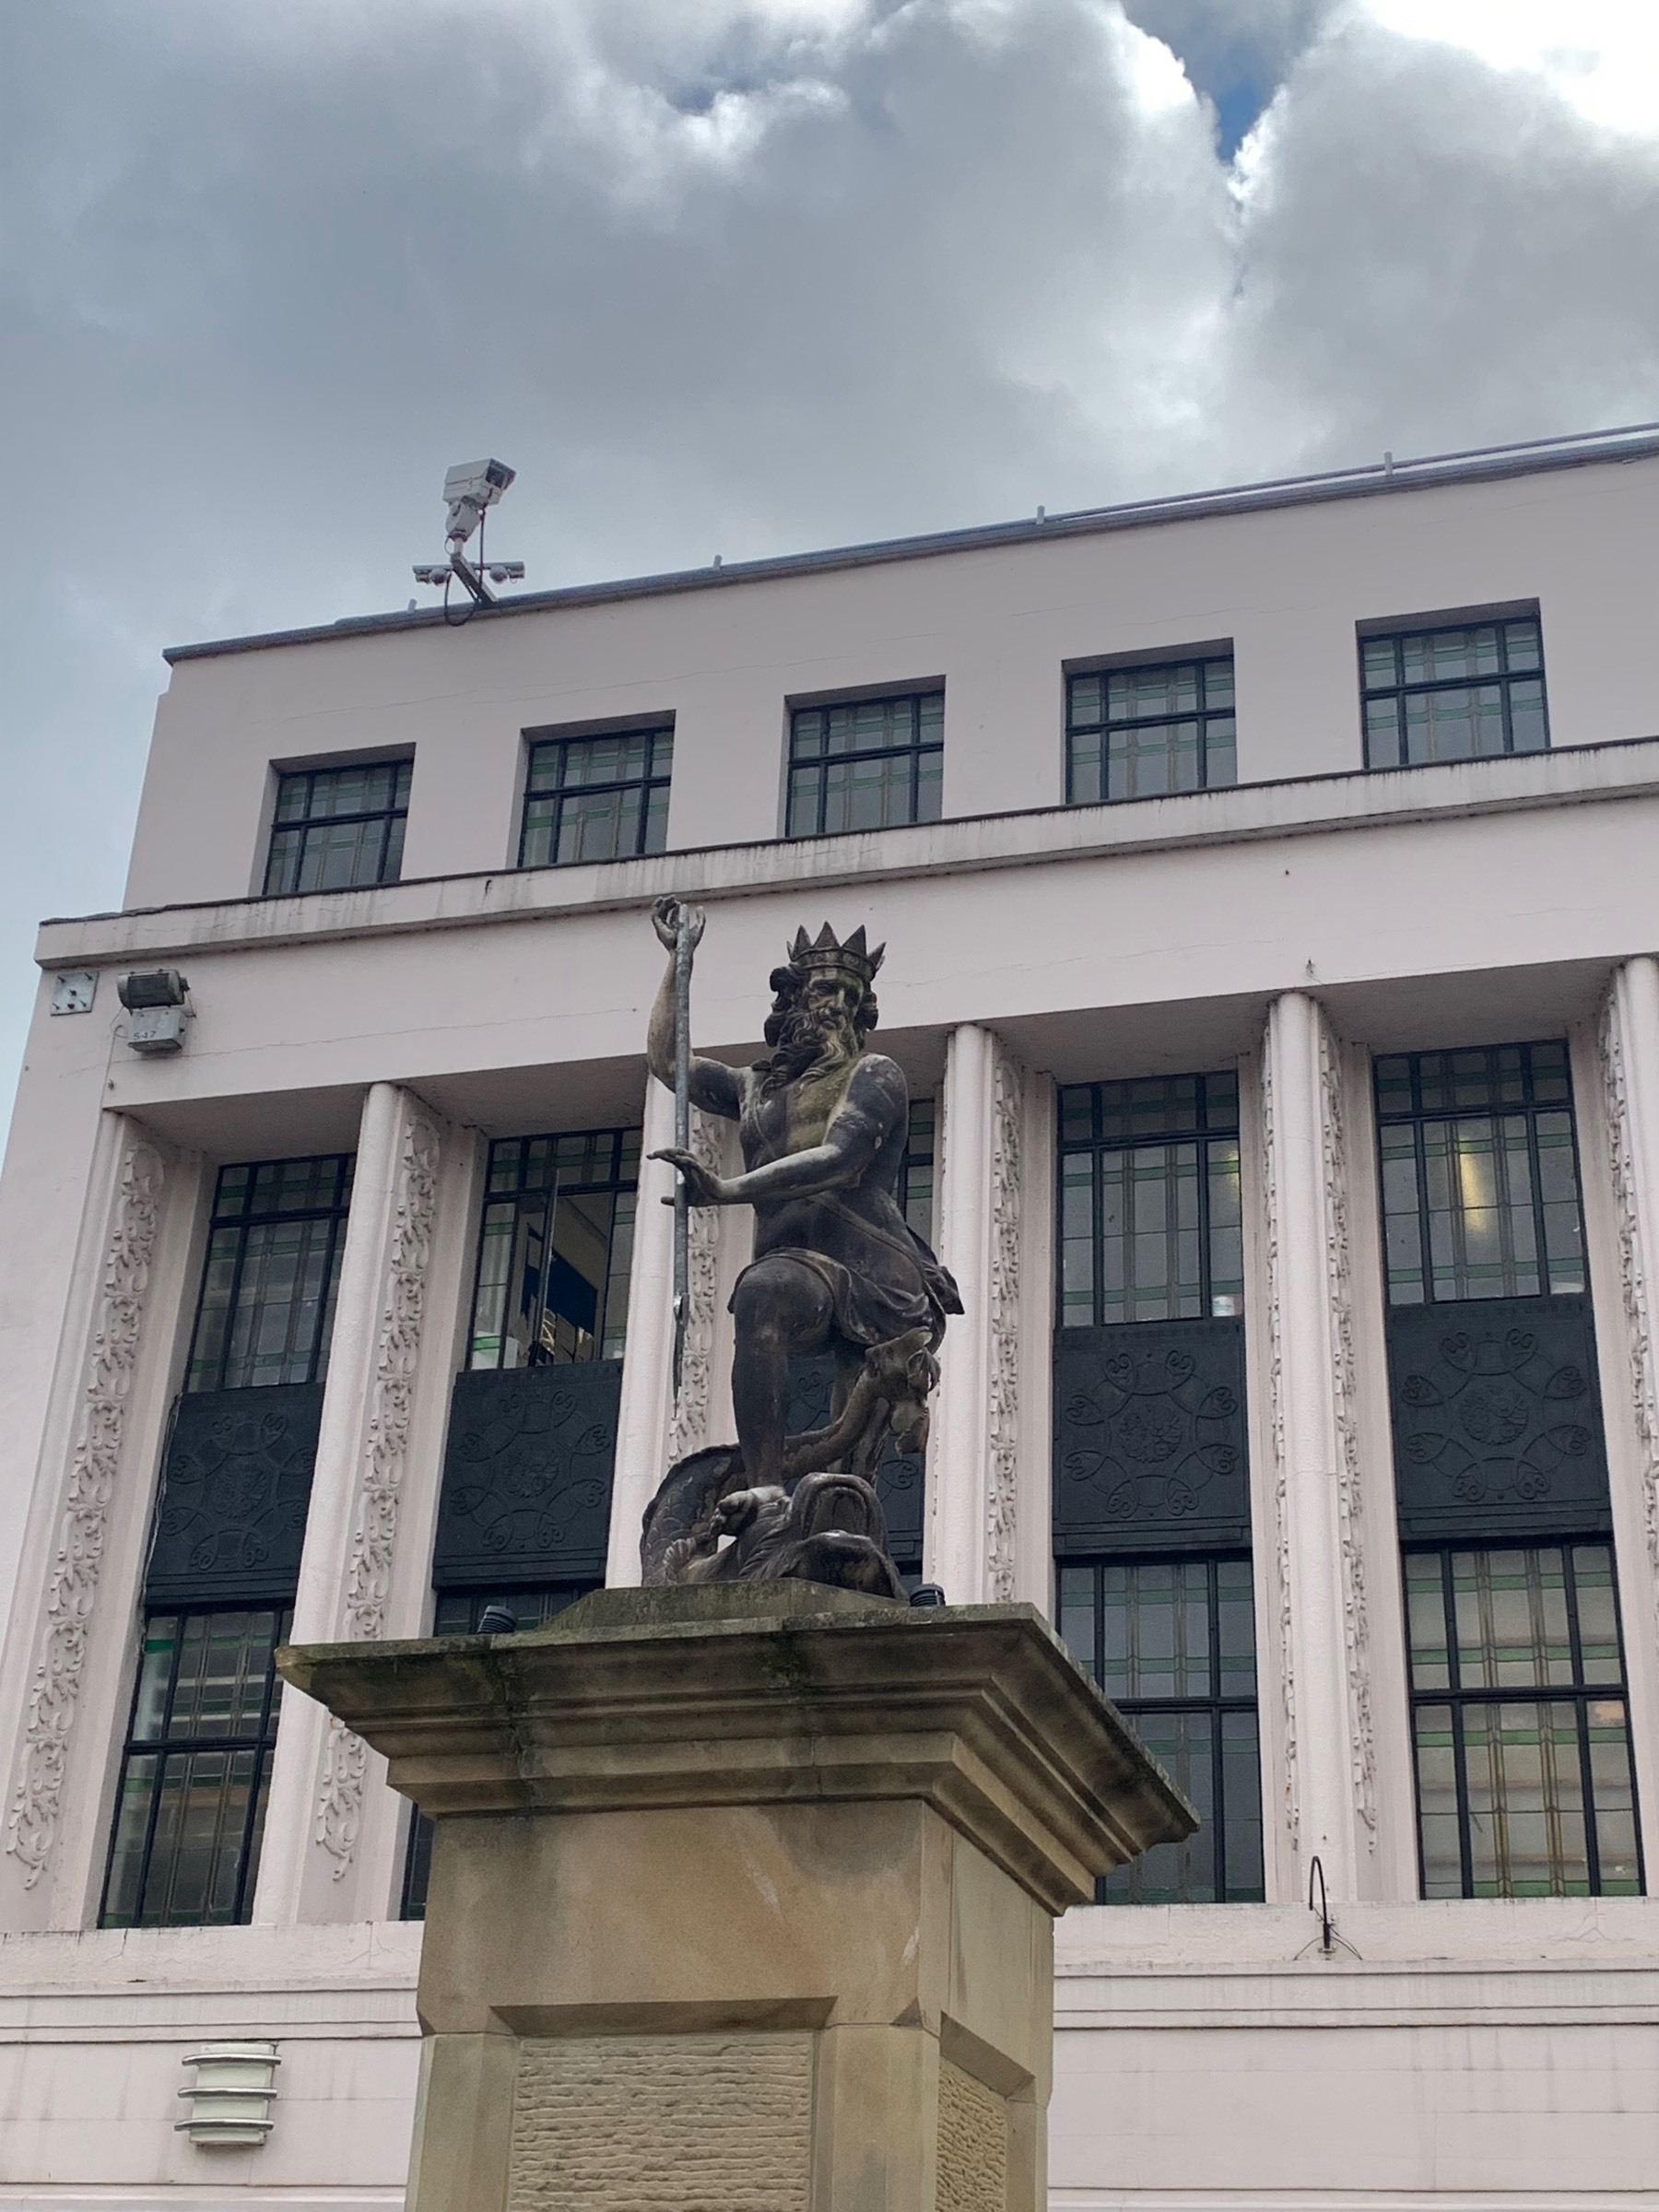 A statue of Neptune on a plinth in front of a decorative white building with lots of windows.